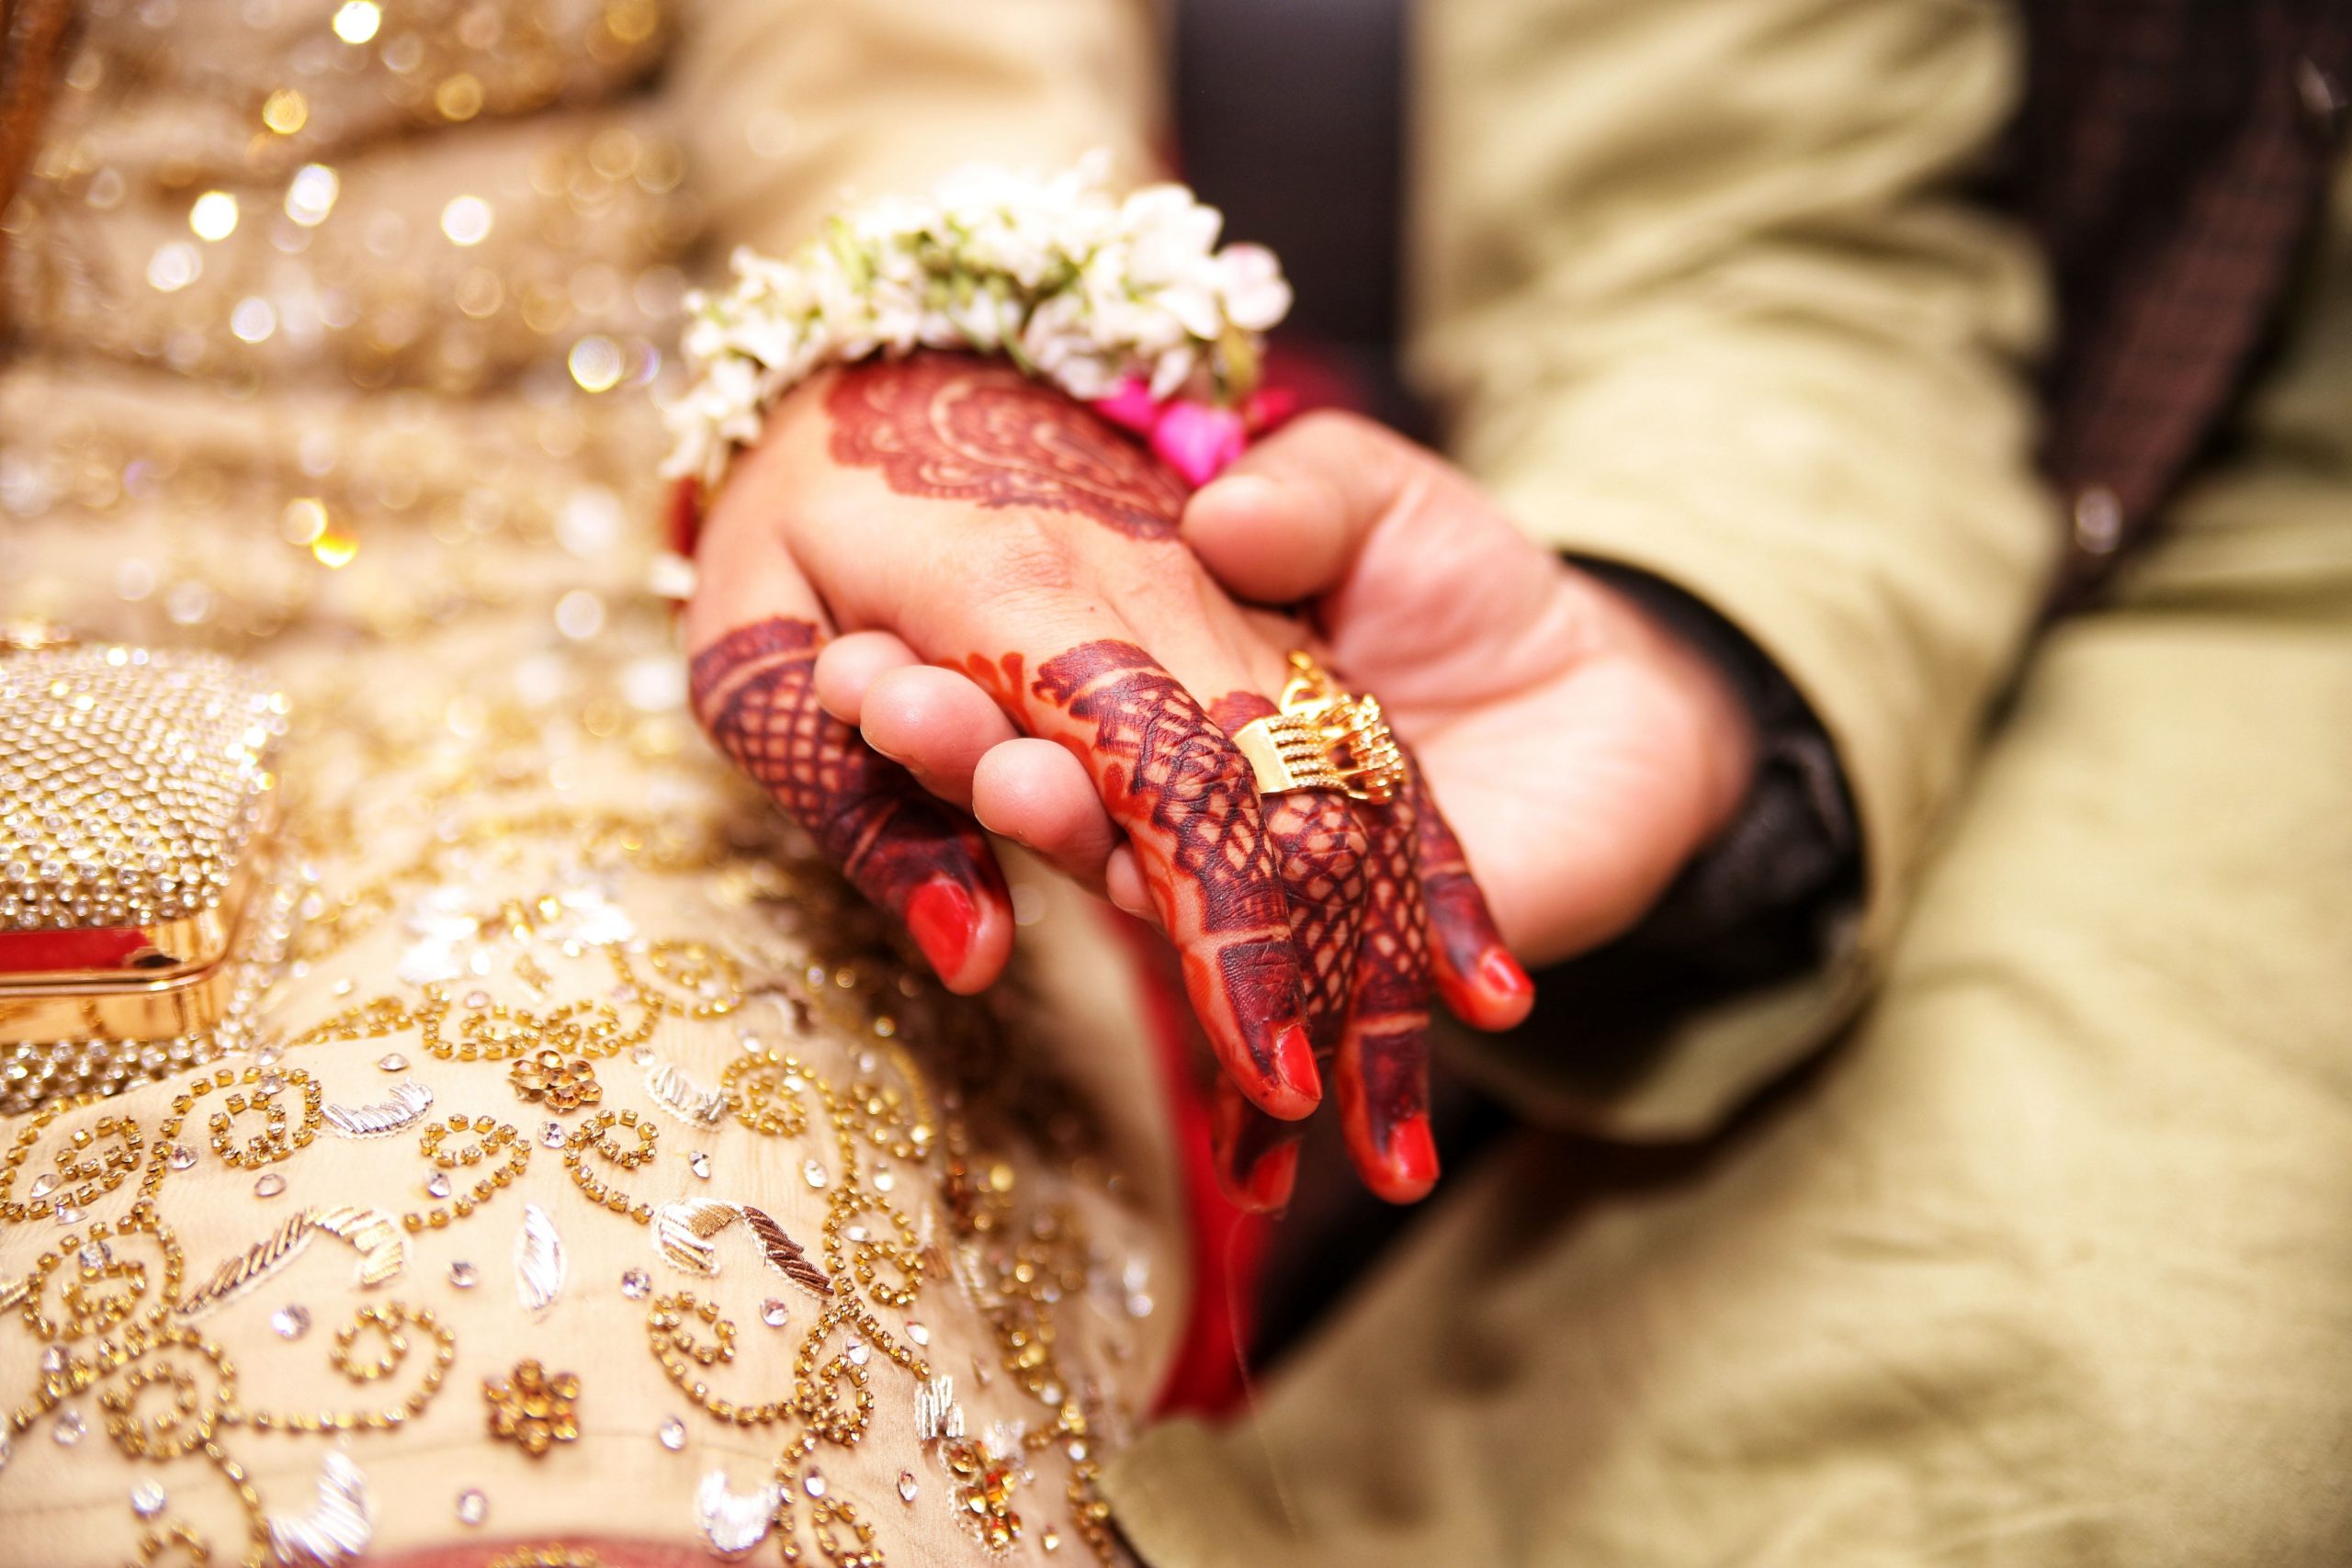 Over 80% of Indians oppose interfaith marriage, says study